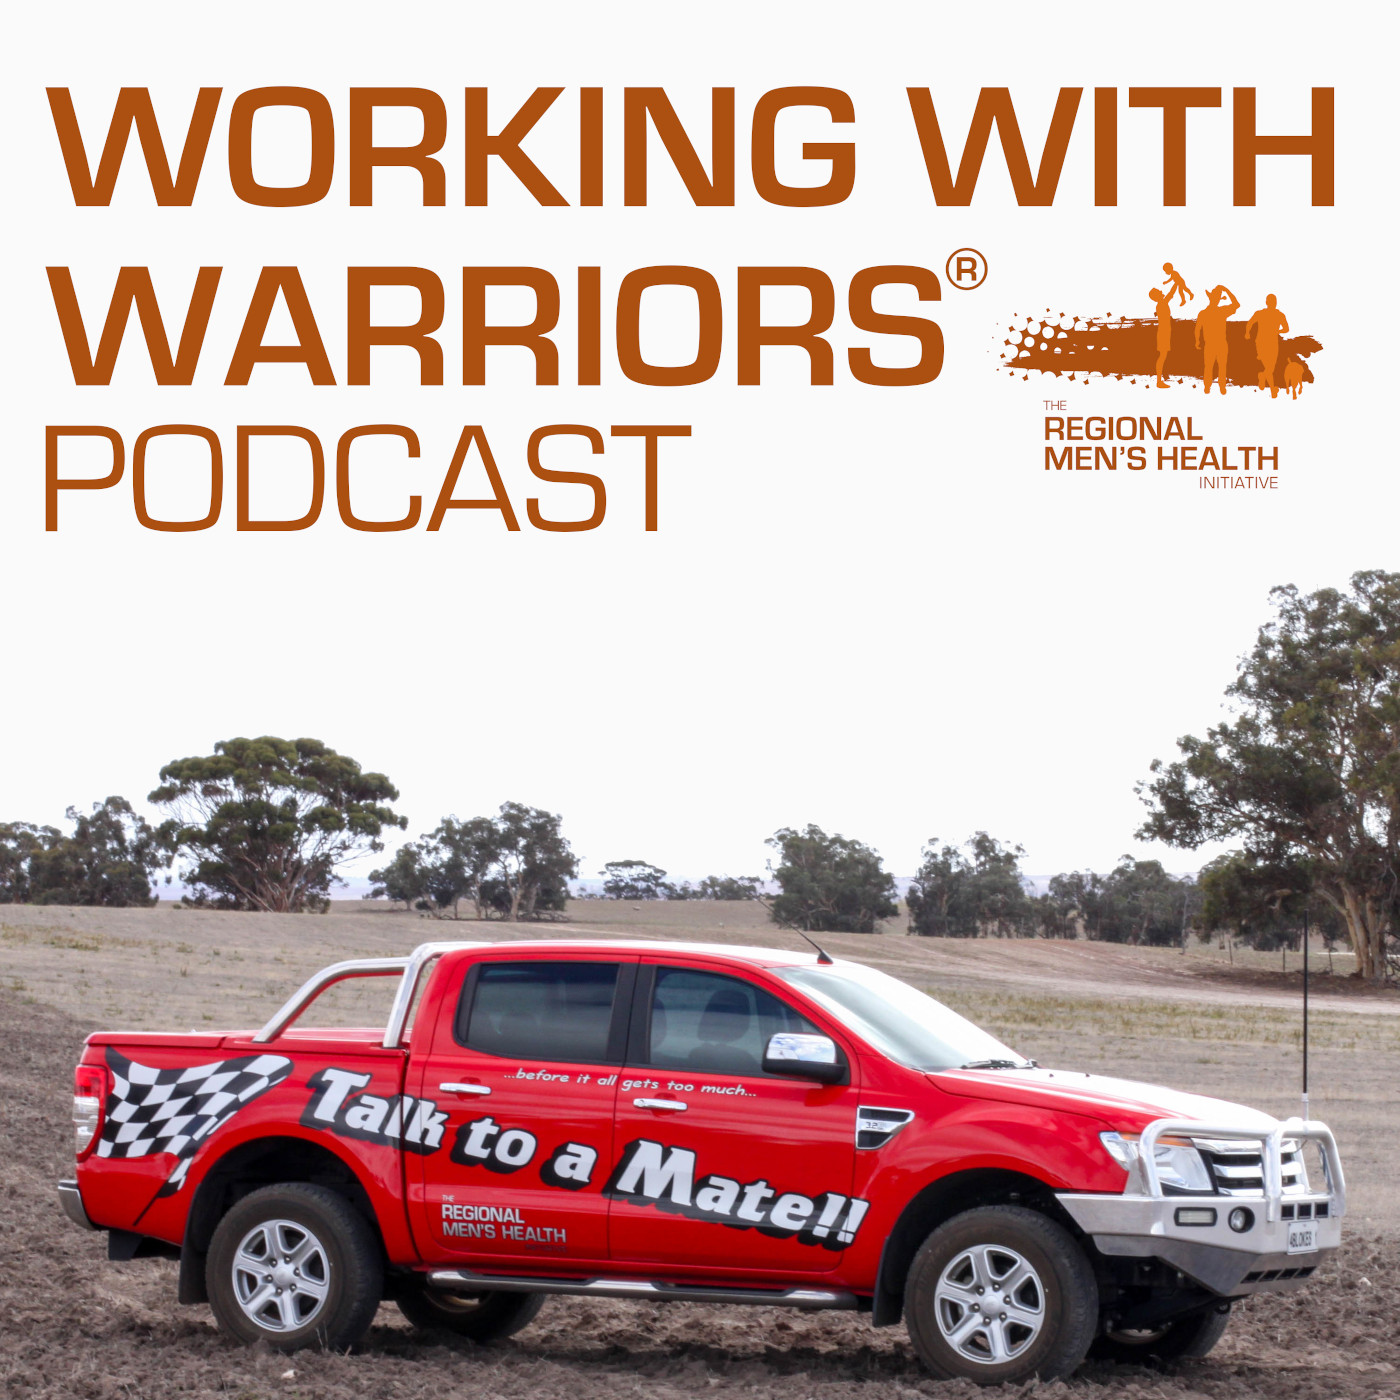 Working with Warriors® Podcast